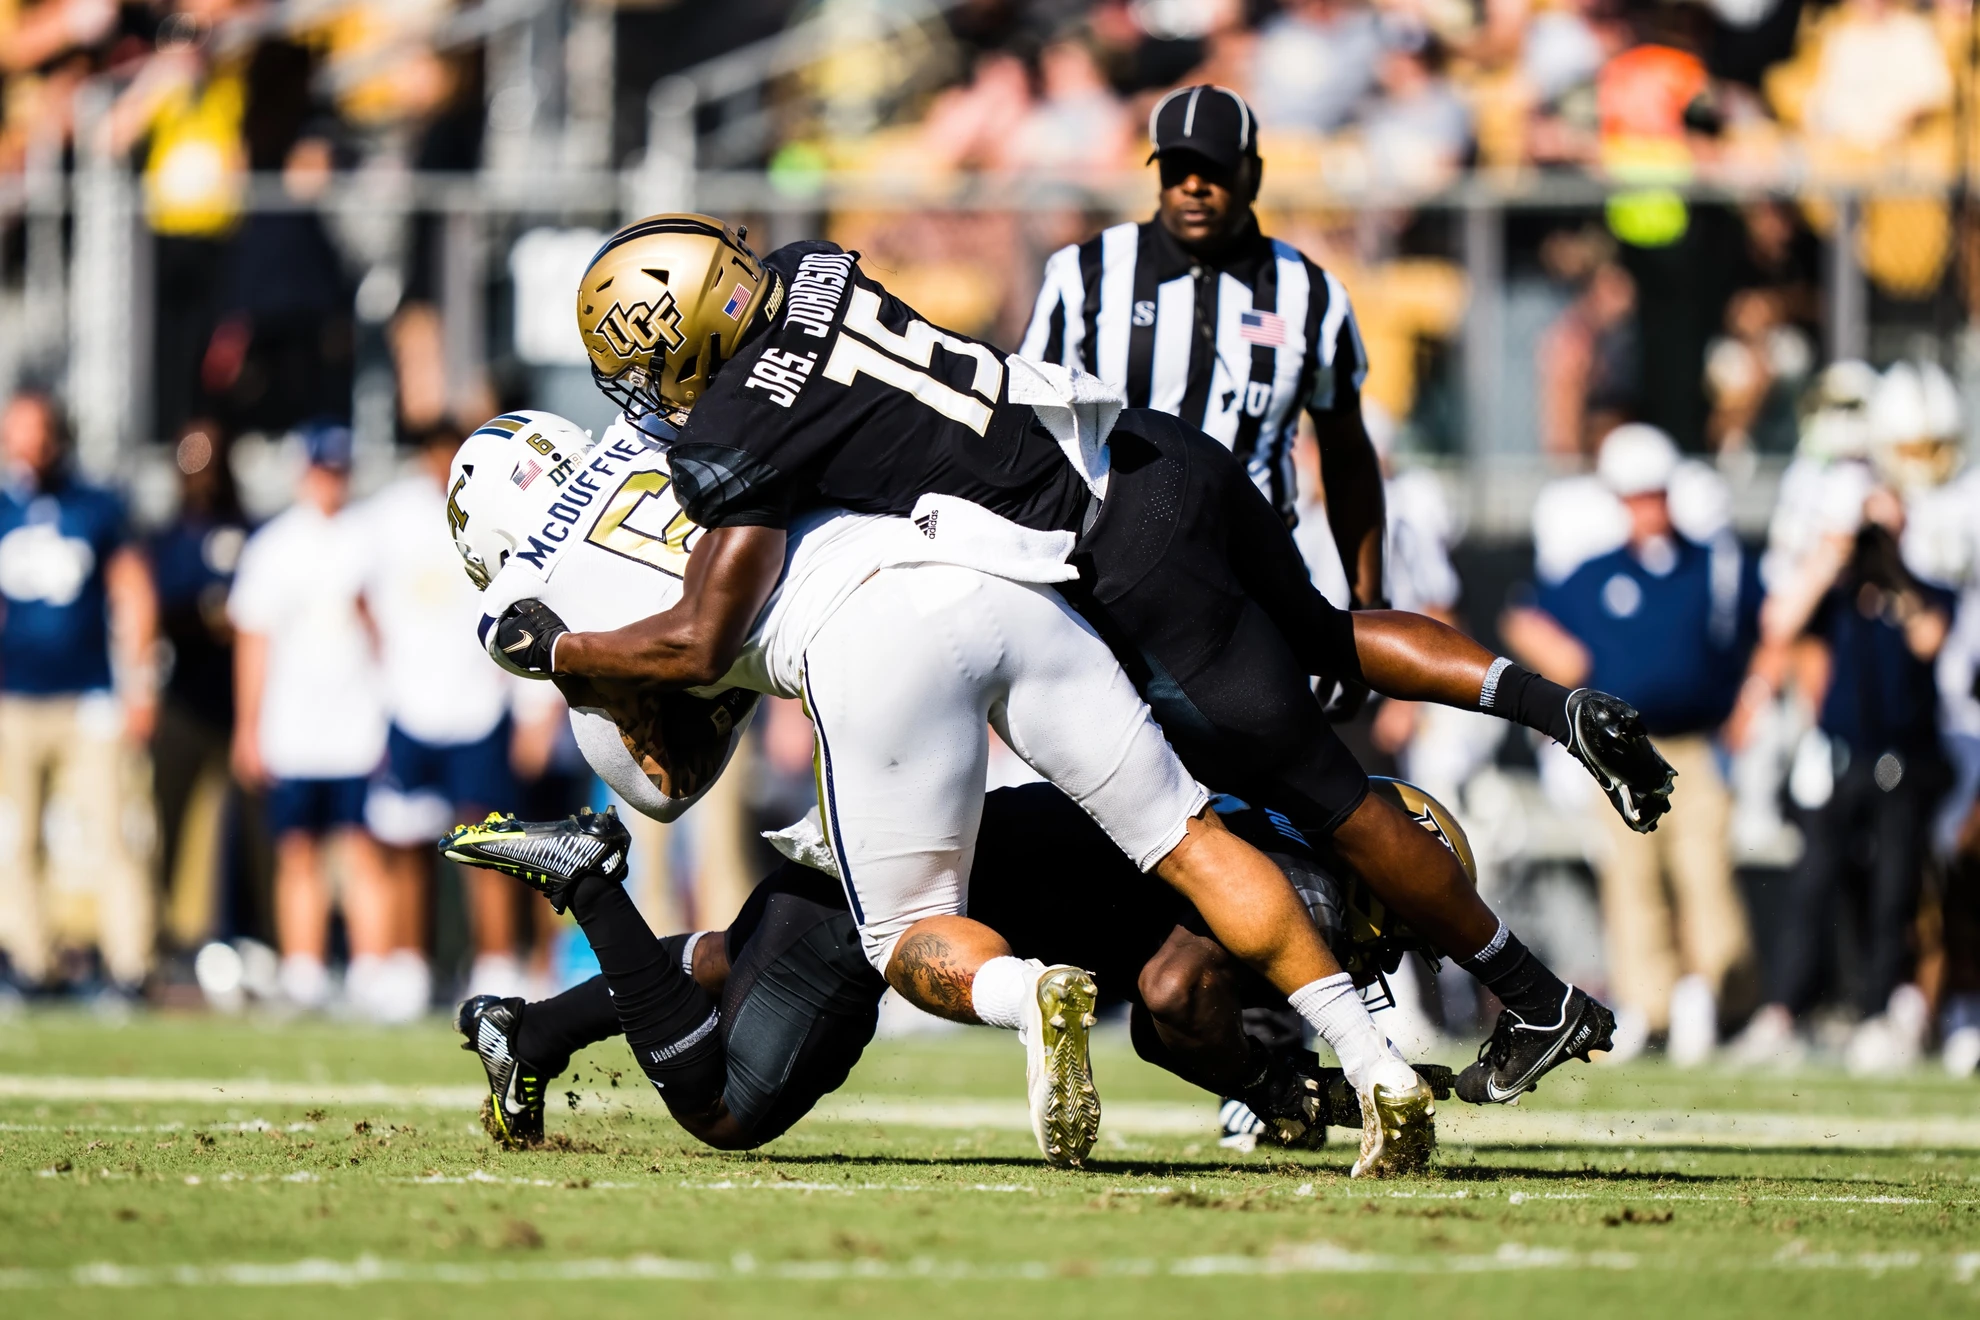 Jason Johnson boasts great quickness as a reliable linebacker in UCF's defense. Hula Bowl scout Brinson Bagley breaks down Johnson as an NFL Prospect in his report.